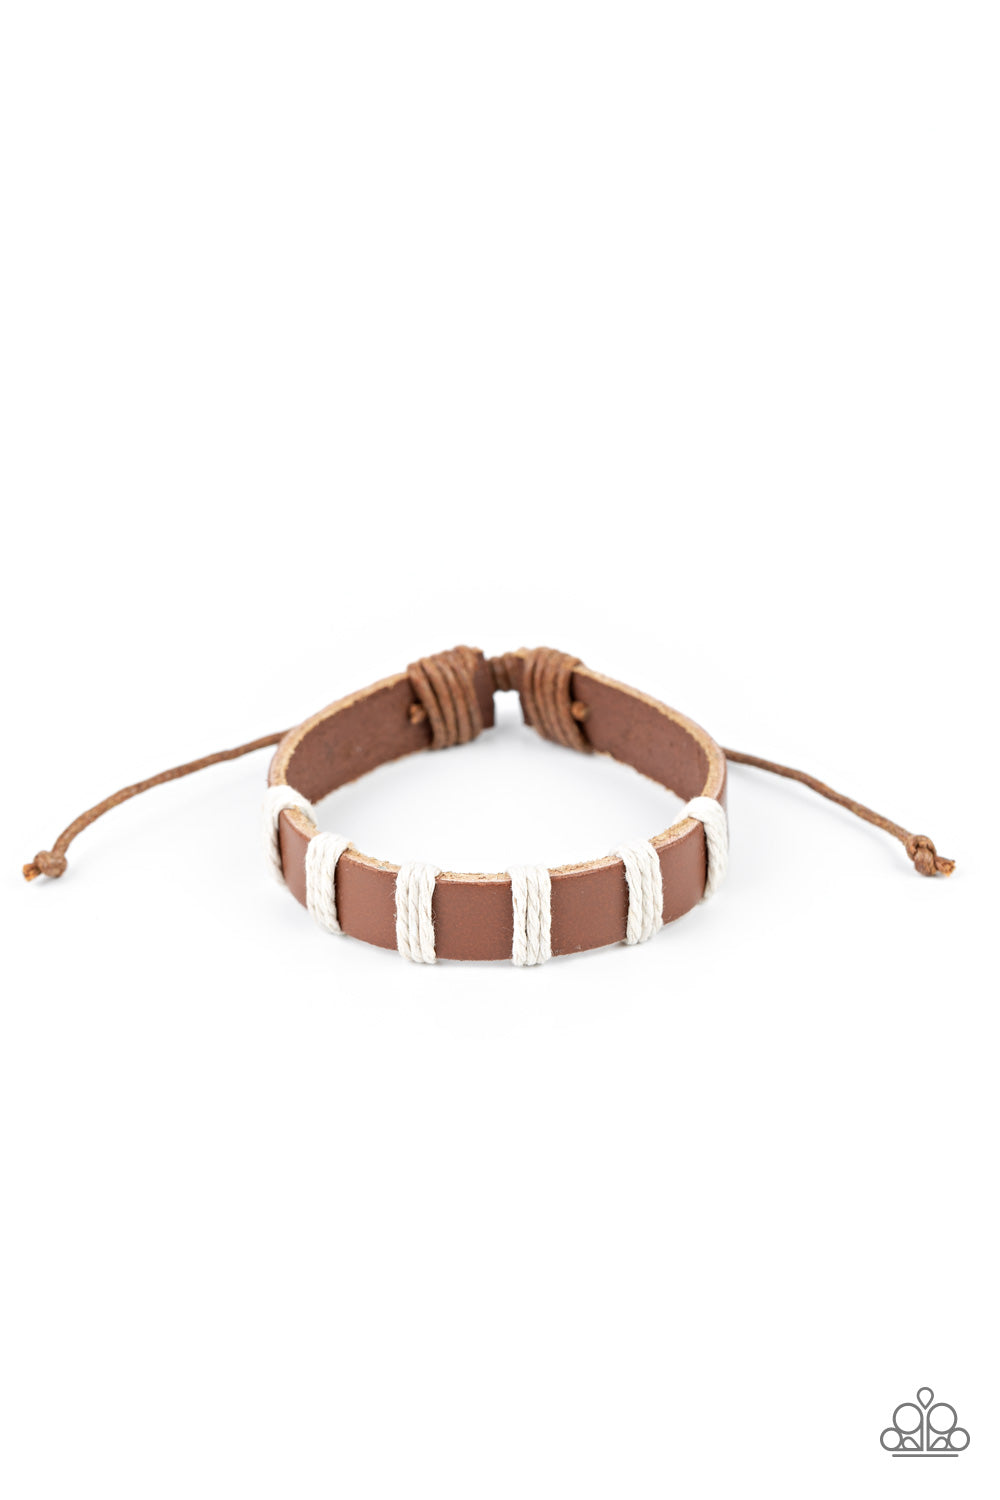 five-dollar-jewelry-put-up-a-brave-frontier-brown-bracelet-paparazzi-accessories